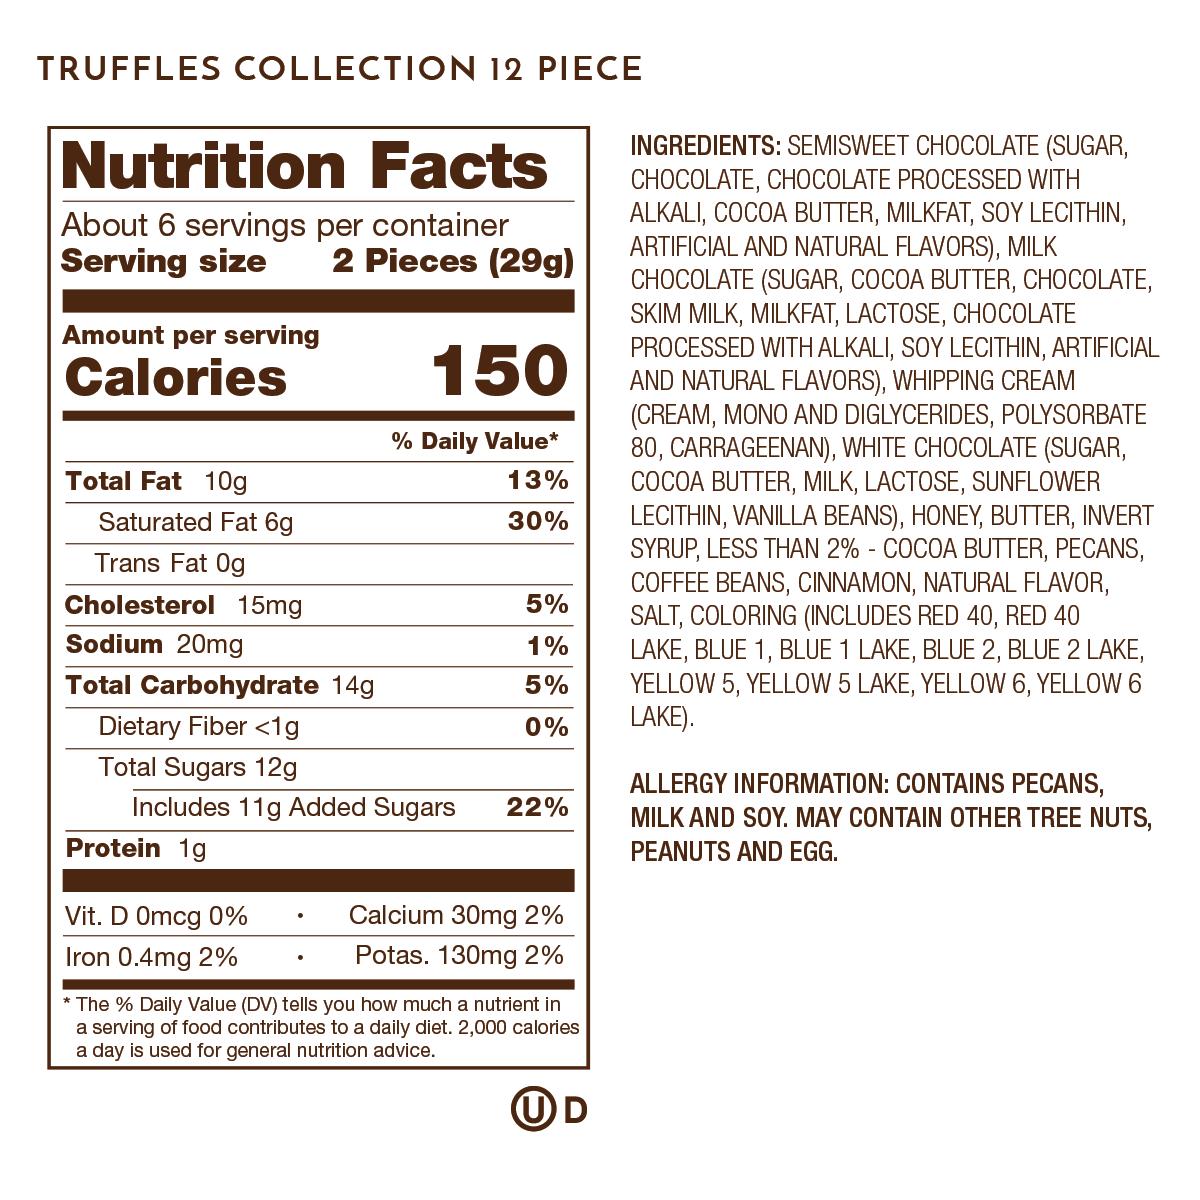 Truffles 12pc nutrition facts and ingredients. Please call 1-800-438-4356 for more information.